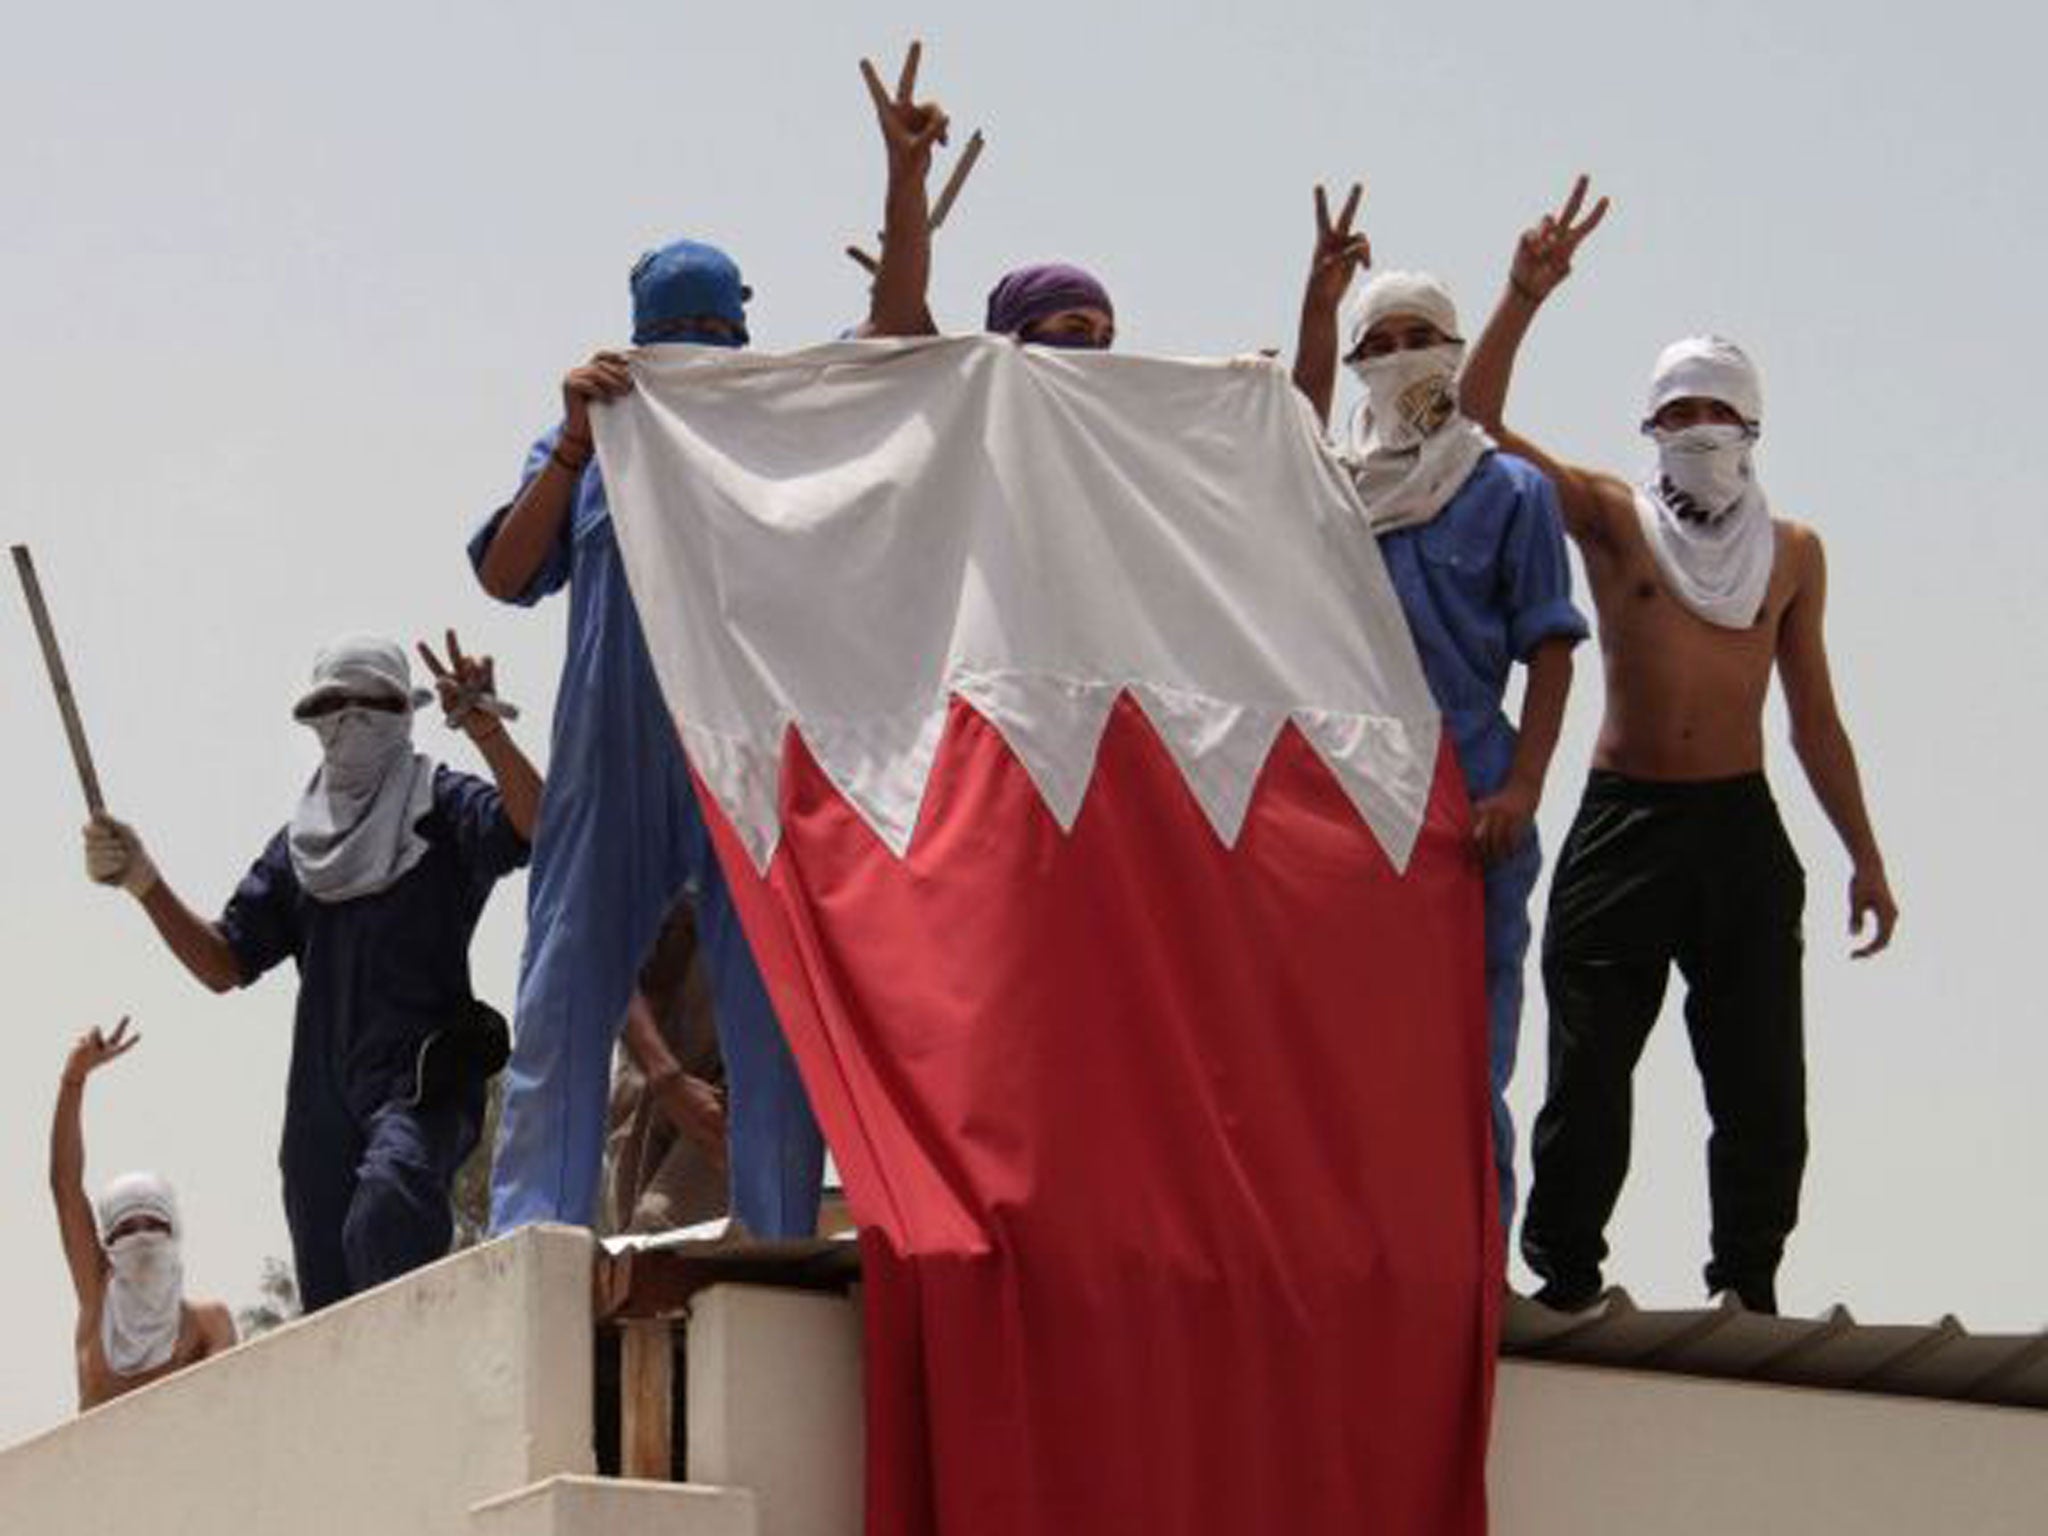 Bahraini students carry their national flag during clashes with riot police in Manama, Bahrain